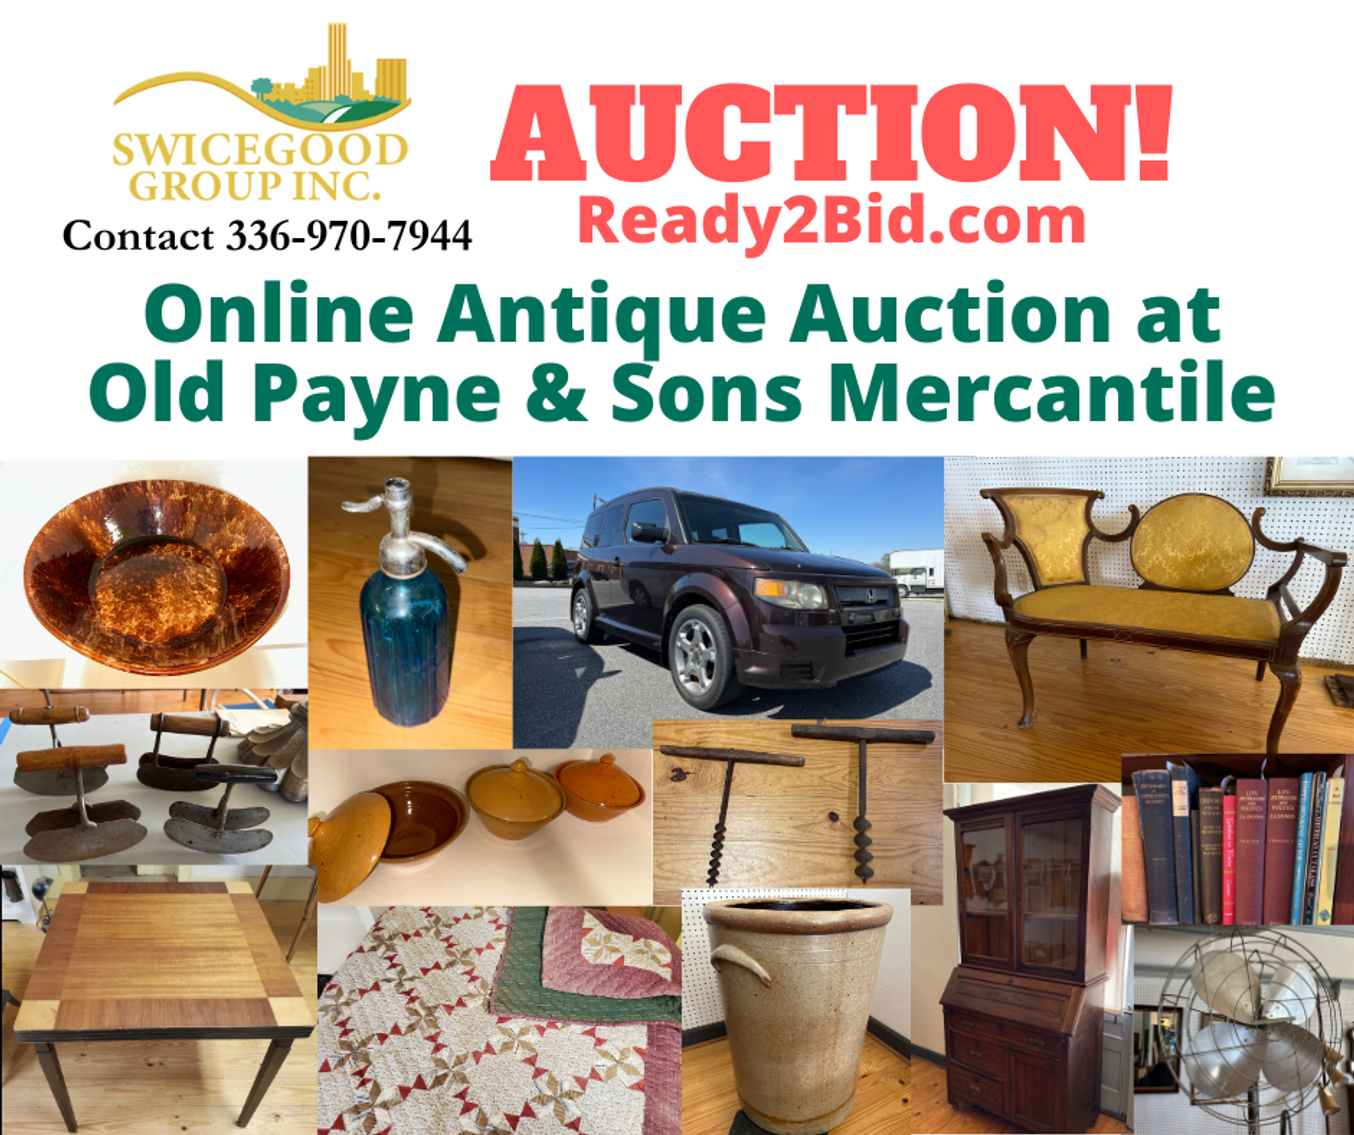 Online Antique Auction at Old Payne & Sons Mercantile 